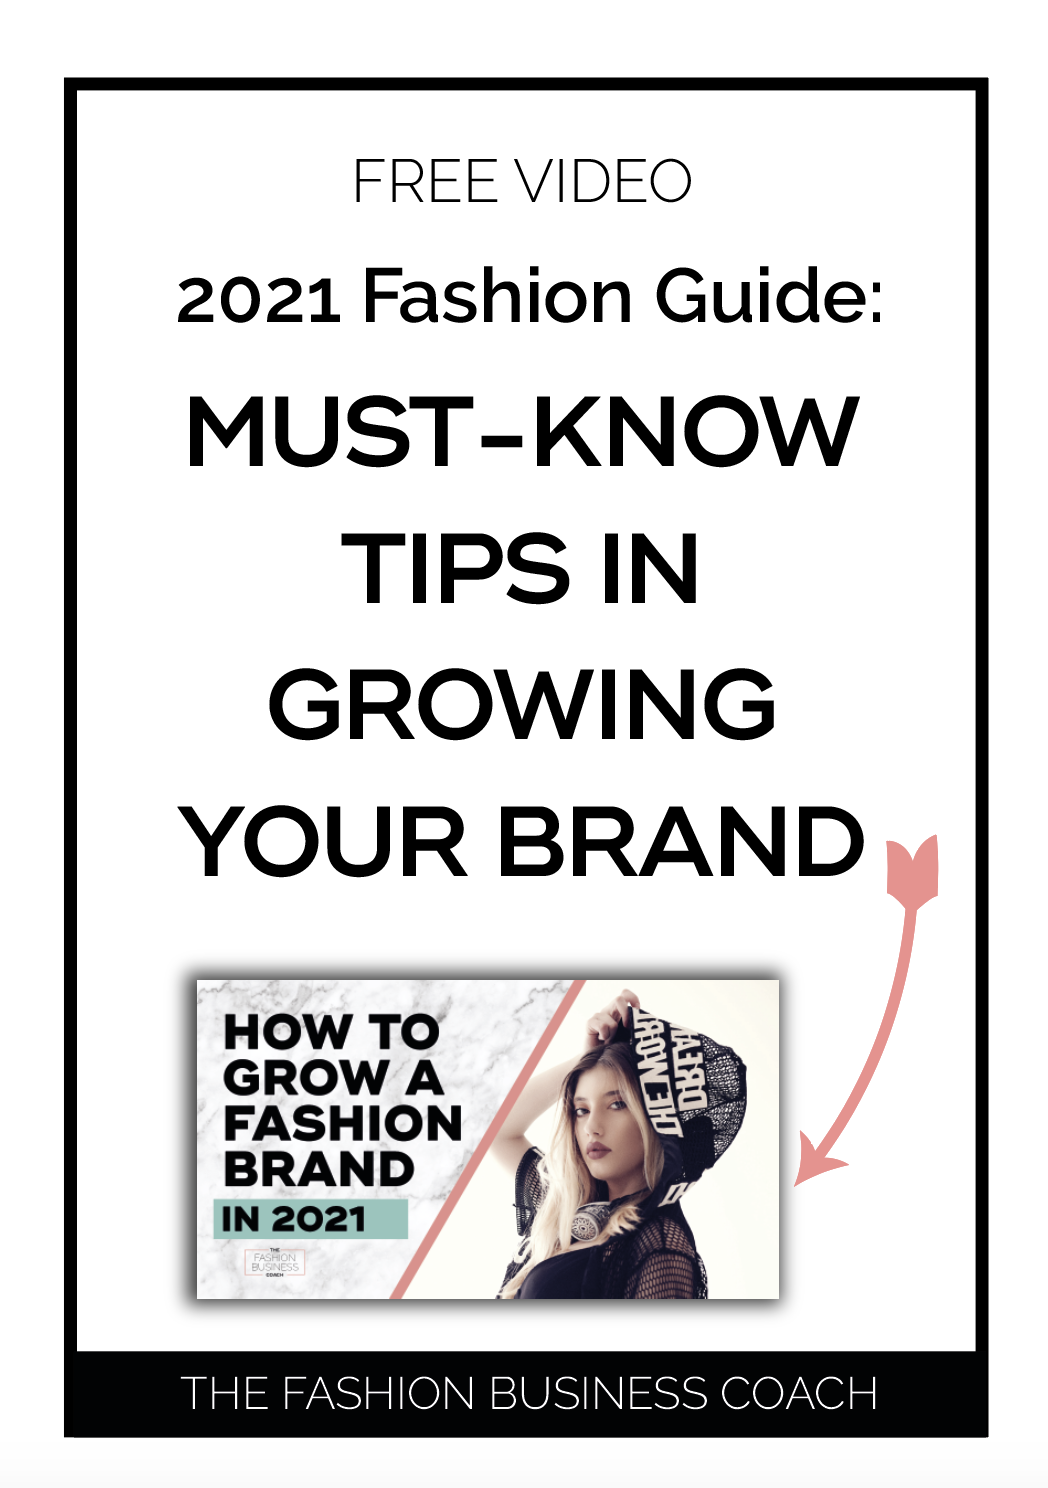 2021 Fashion Guide Must-Know Tips in Growing your Brand 3.png